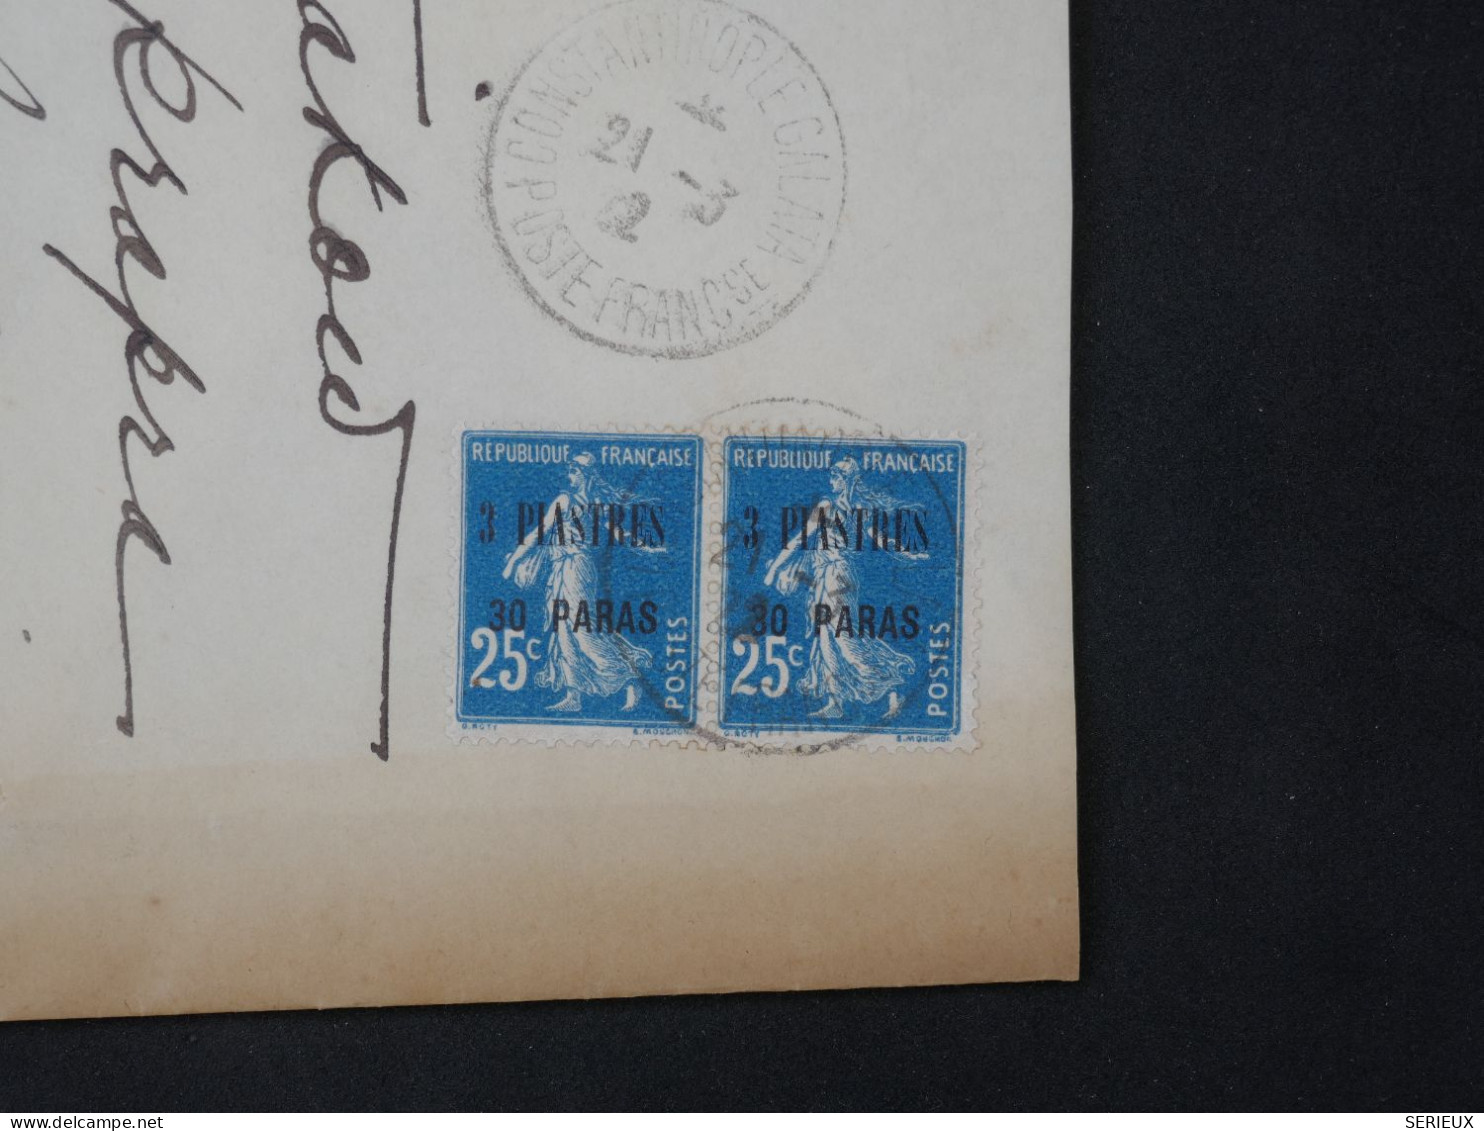 BV15 LEVANT FRANCE  BELLE LETTRE TRES RARE  1922 AMERICAN AMBASSY CONSTANTINOPLE A SOFIA BULGARIE   +2X TP SURCHARGE+ - Covers & Documents